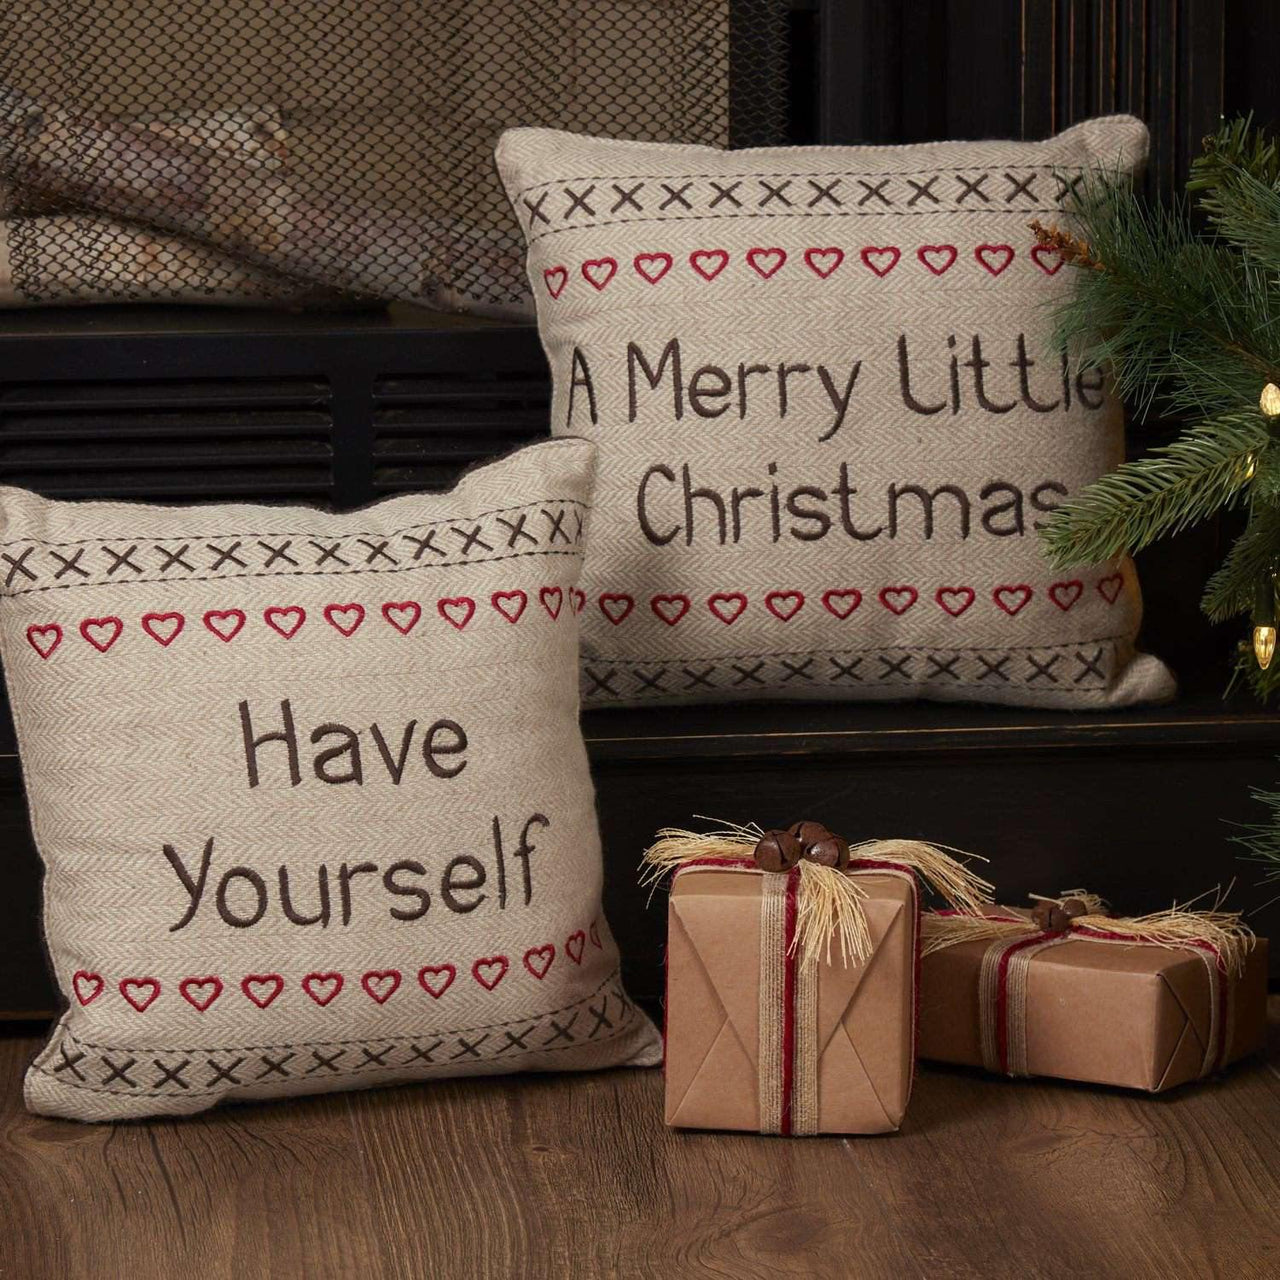 Merry Little Christmas Pillow Have Yourself A Set of 2 12x12